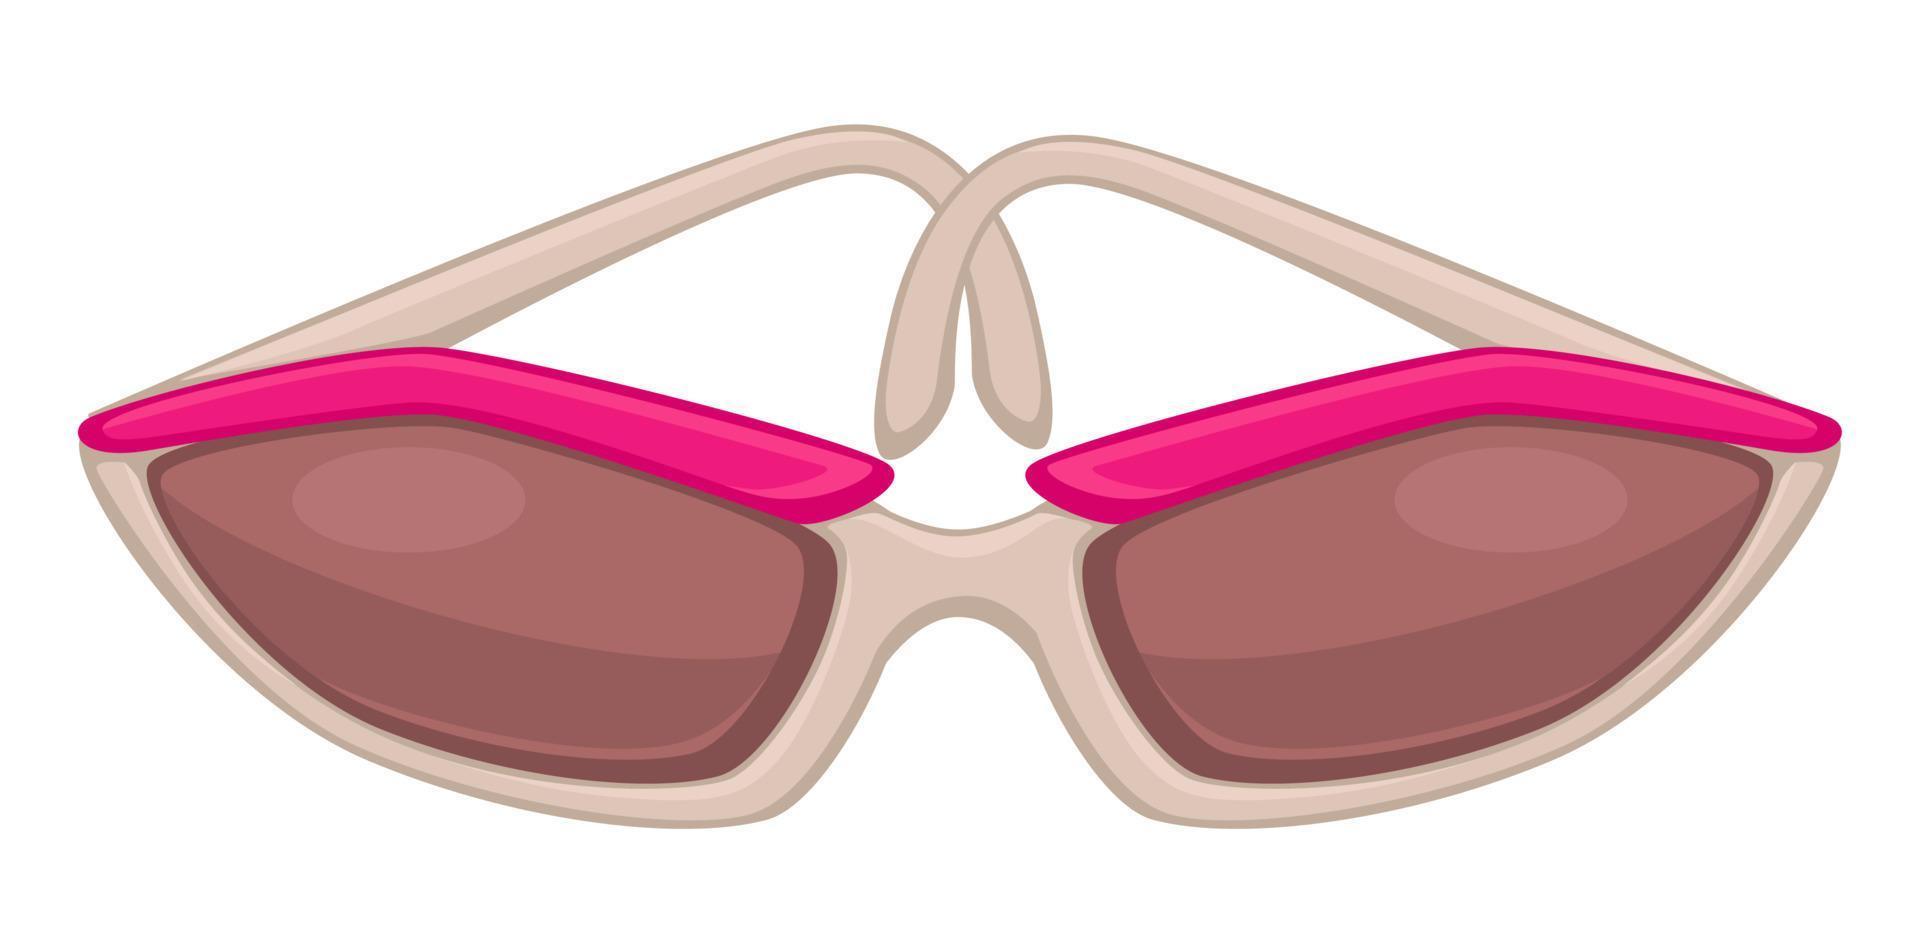 Fashionable women sunglasses for summer vacation, stylish accessories vector